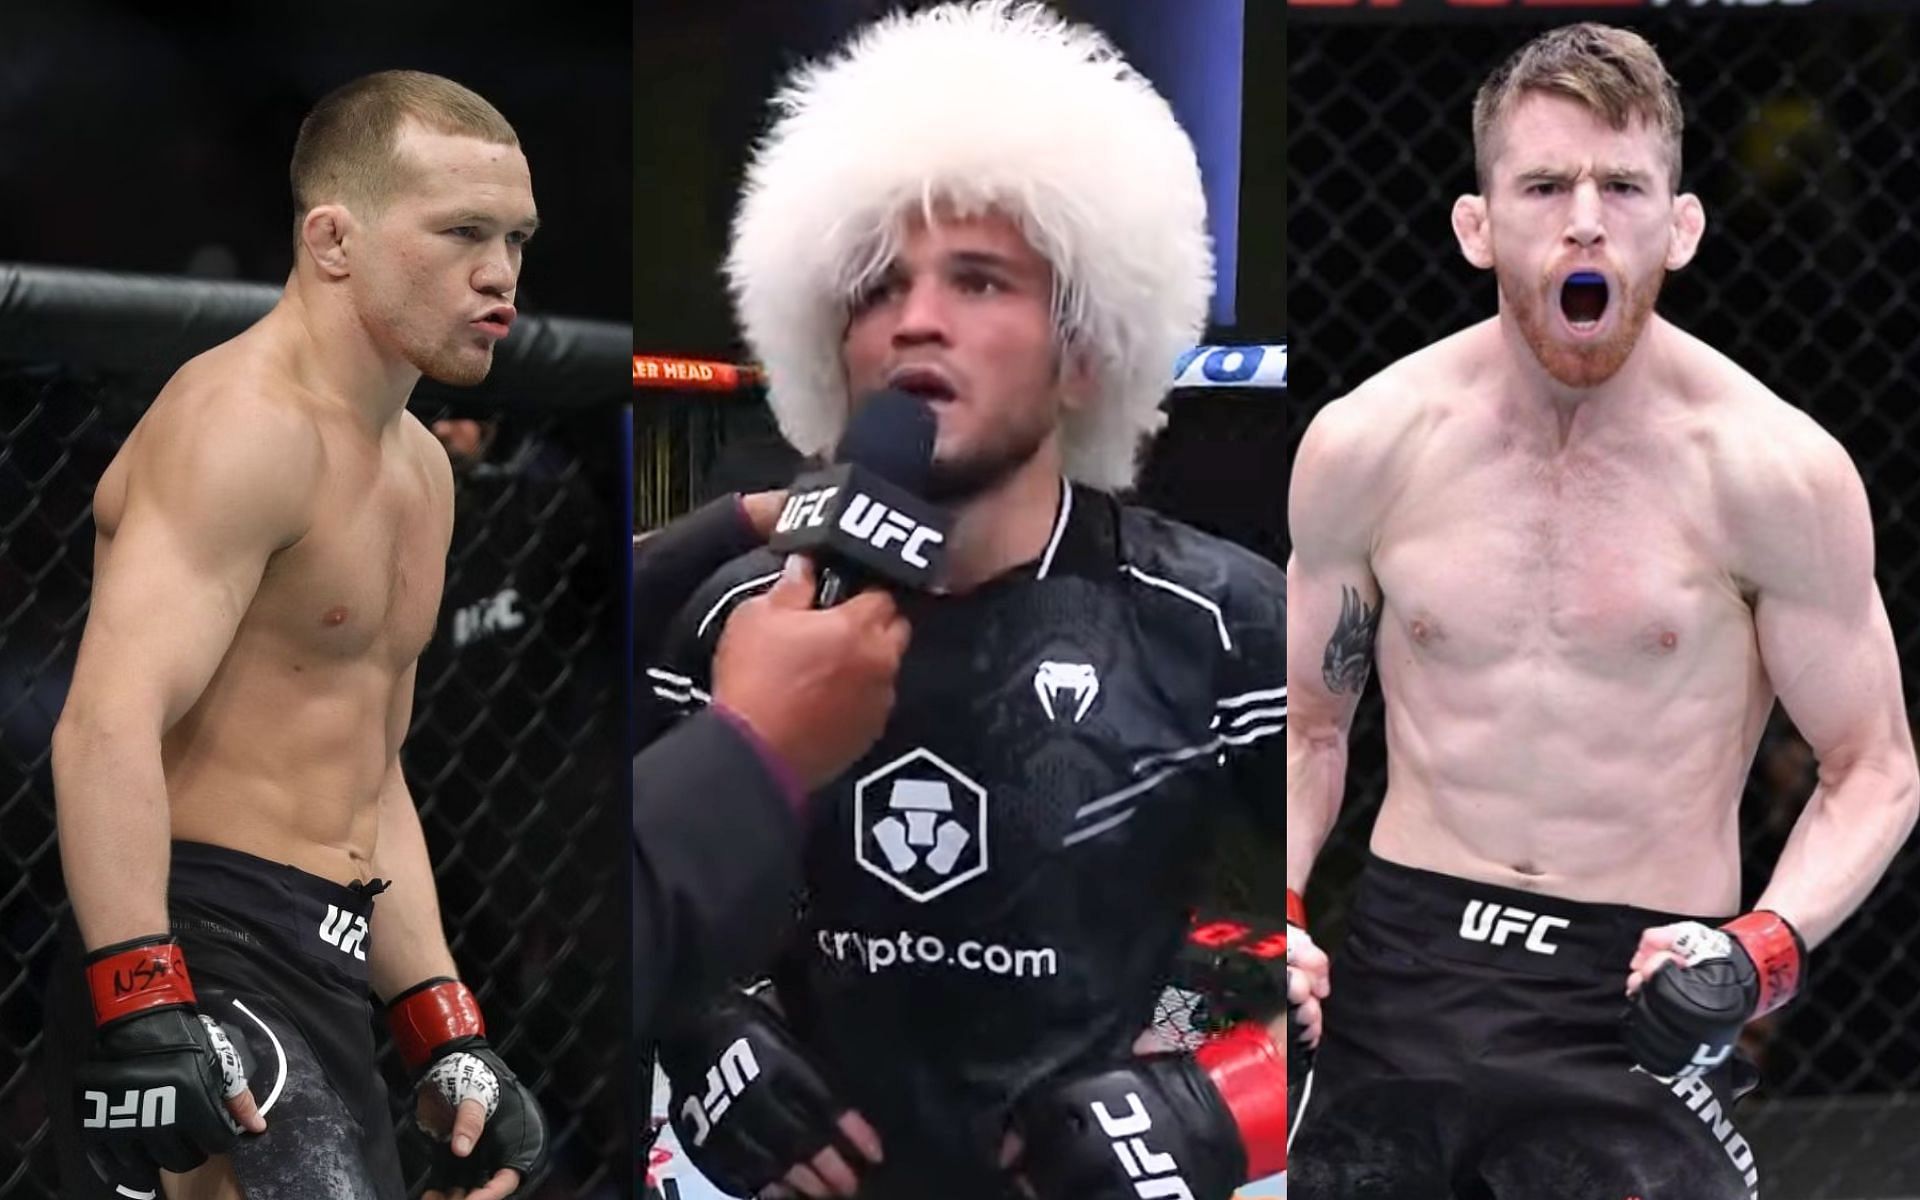 Umar Nurmagomedov (middle) calls for a clash with either Petr Yan (left) or Cory Sandhagen (right) next [Images Courtesy: @GettyImages, @ufc on YouTube and @corysandhagenmma on Instagram]